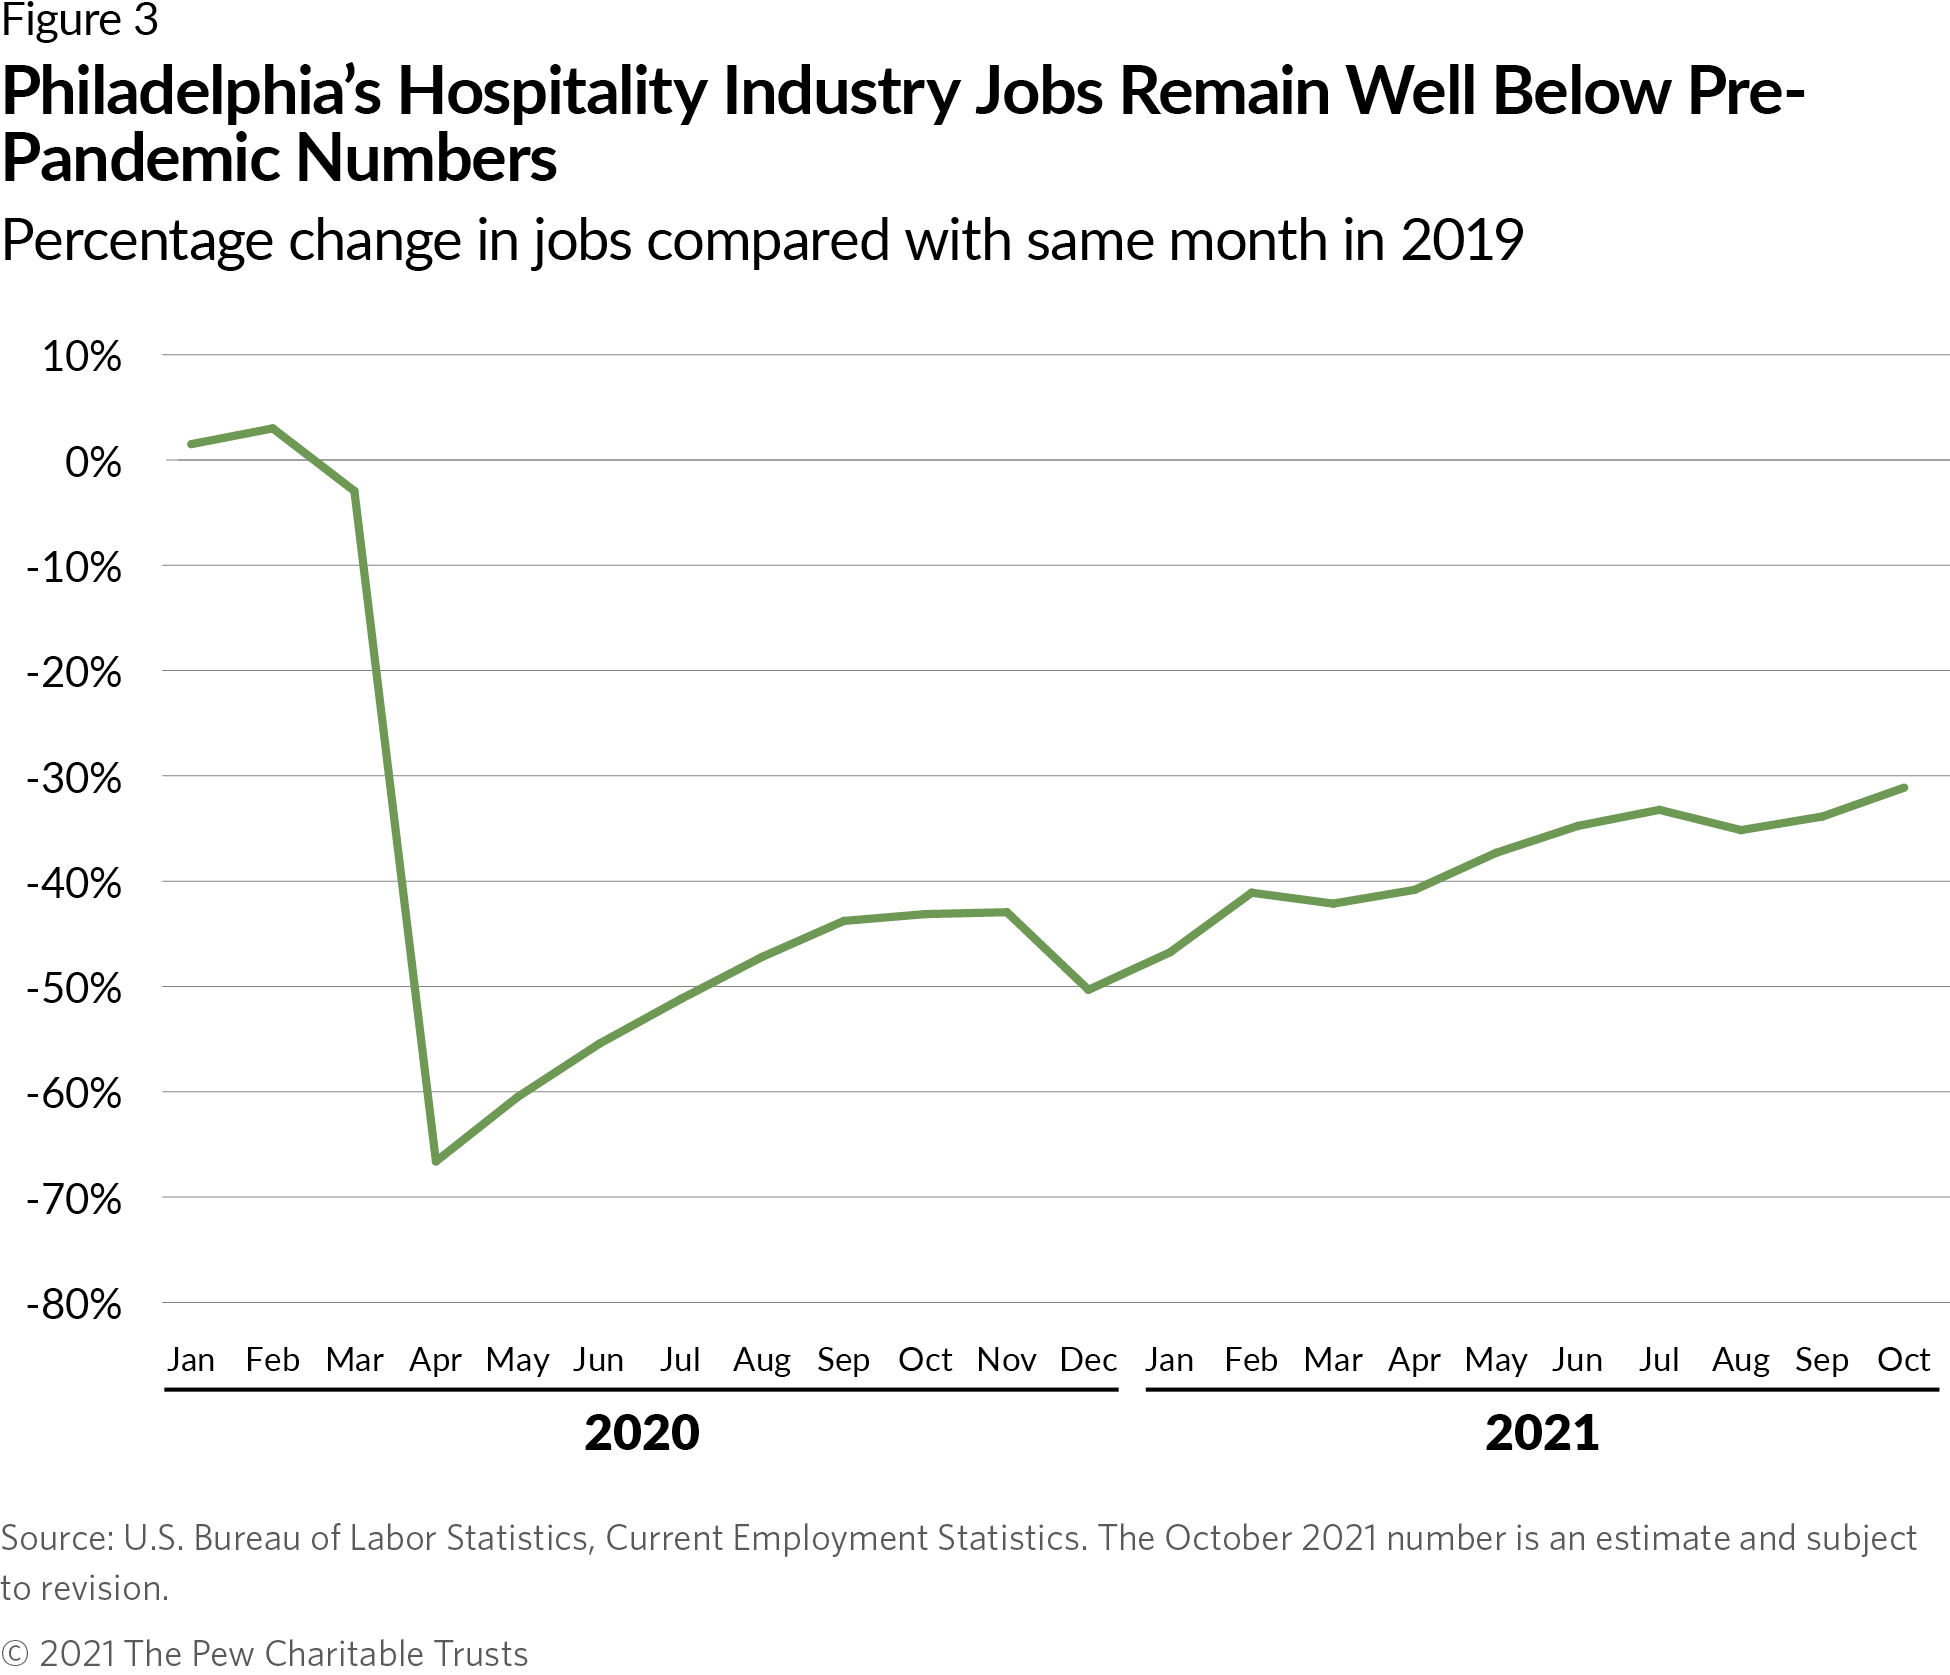 Philadelphia's Hospitality Industry Jobs Remain Well Below Pre-Pandemic Numbers. Percentage change in jobs compared with same month in 2019.